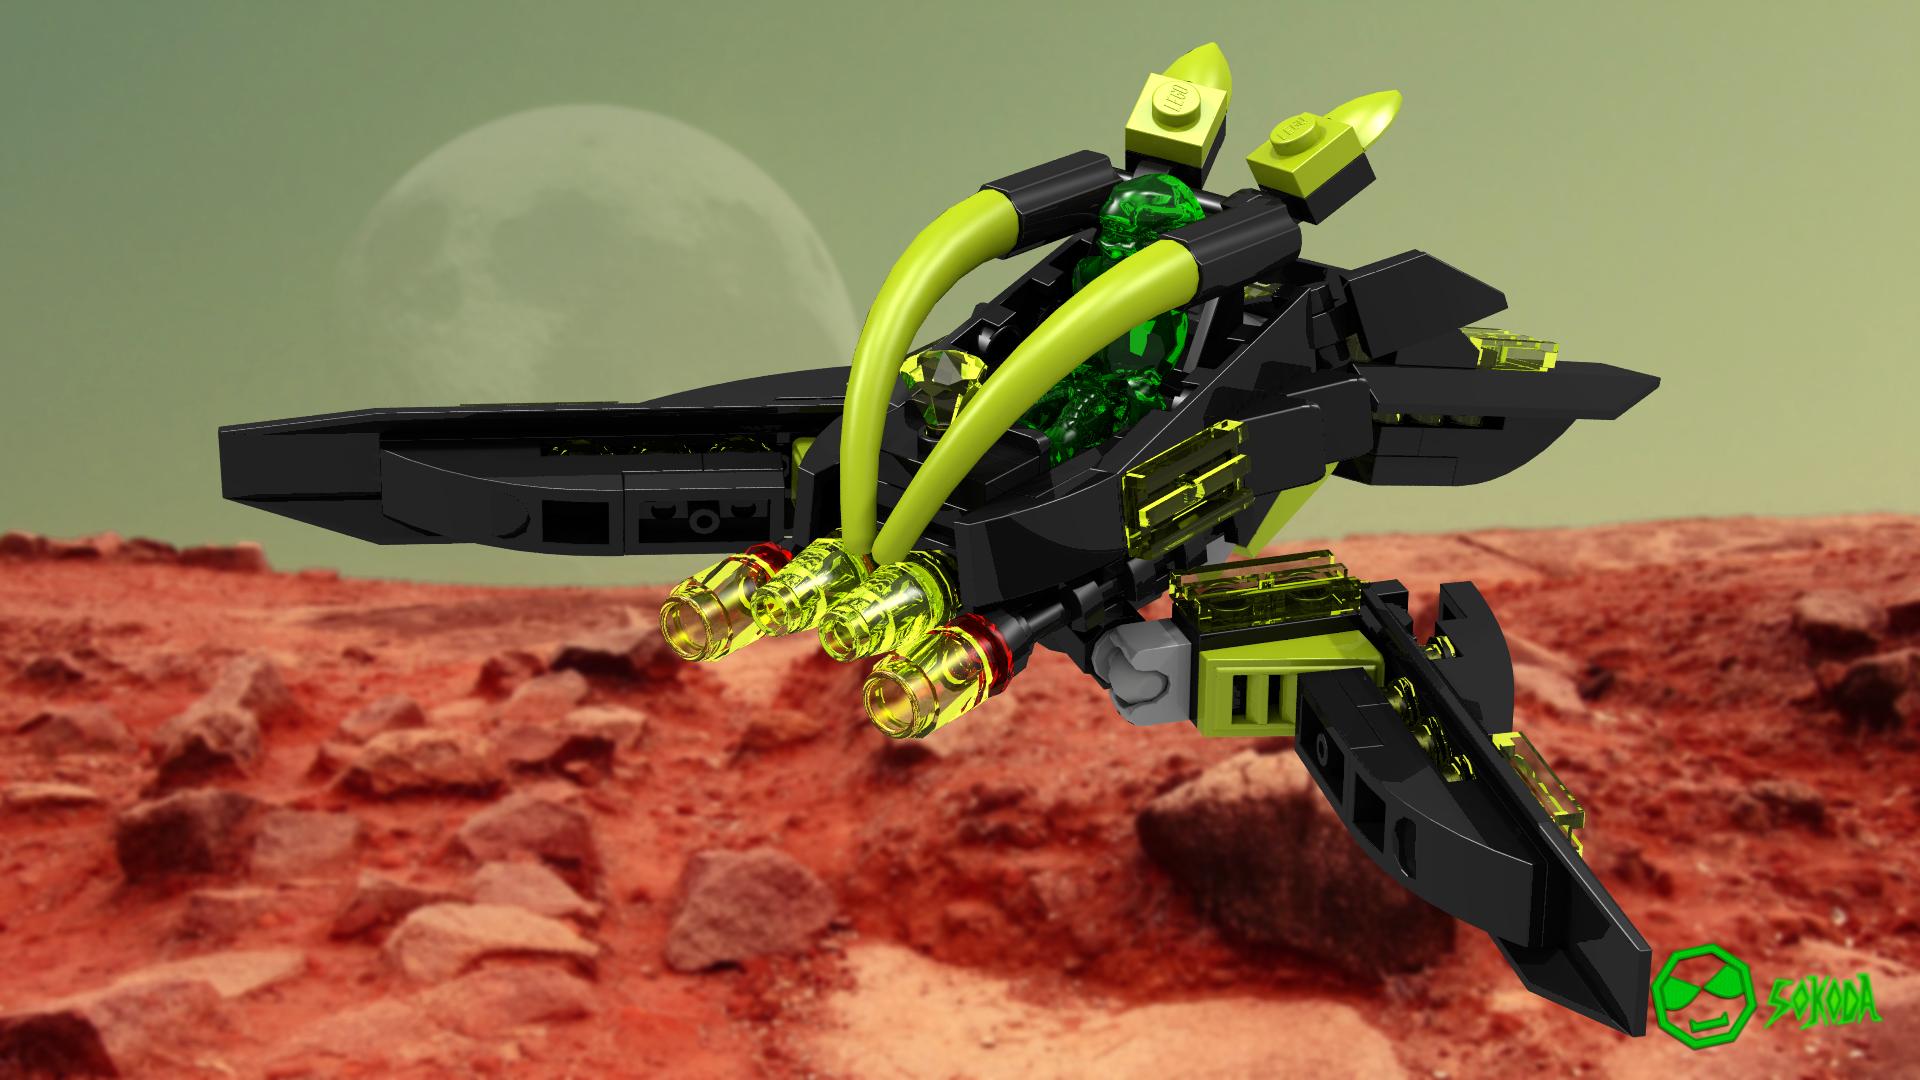 Sokoda on Twitter: "[SWB 9]: ETX Tri-Walker #MarsMission #Lego #MOC #SokodasWeeklyBuilds #Space All pieces used this model exist in the necessary colors! https://t.co/741p26miLY" / Twitter